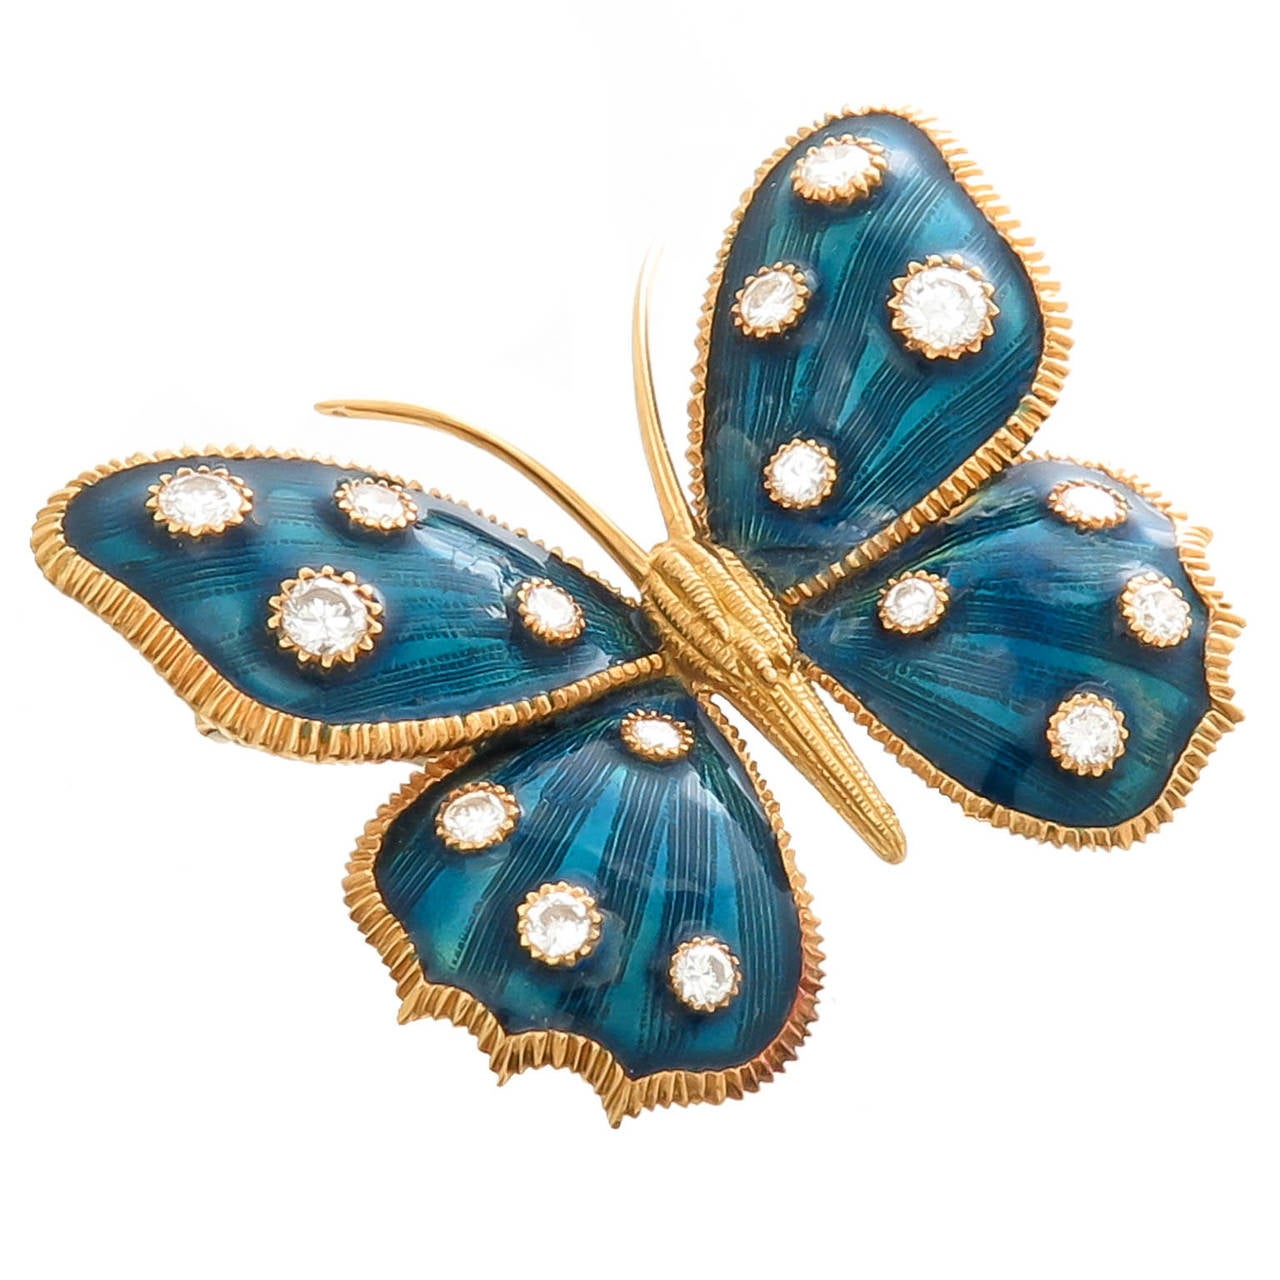 Circa 1980 Butterfly Brooch by Van Cleef and Arpels, 18K Yellow Gold, Blue Guilloche Enamel and set with Round Brilliant cut Diamonds totaling 1.15 Carat. Having a Double pin-clip back, signed, numbered and having French Hall Marks.